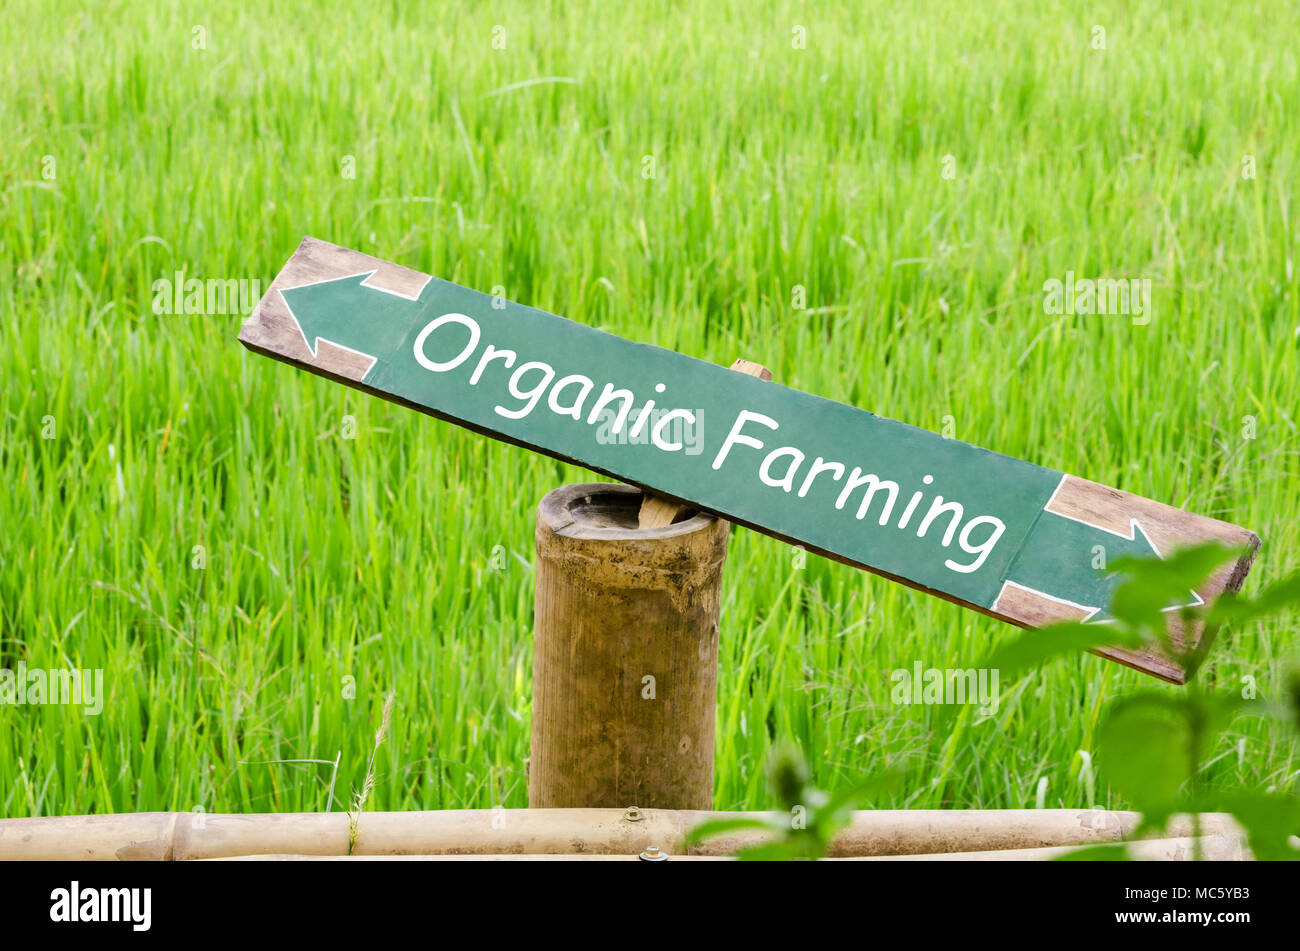 Organic farming on wood label in the nature, rice field blur background. Stock Photo